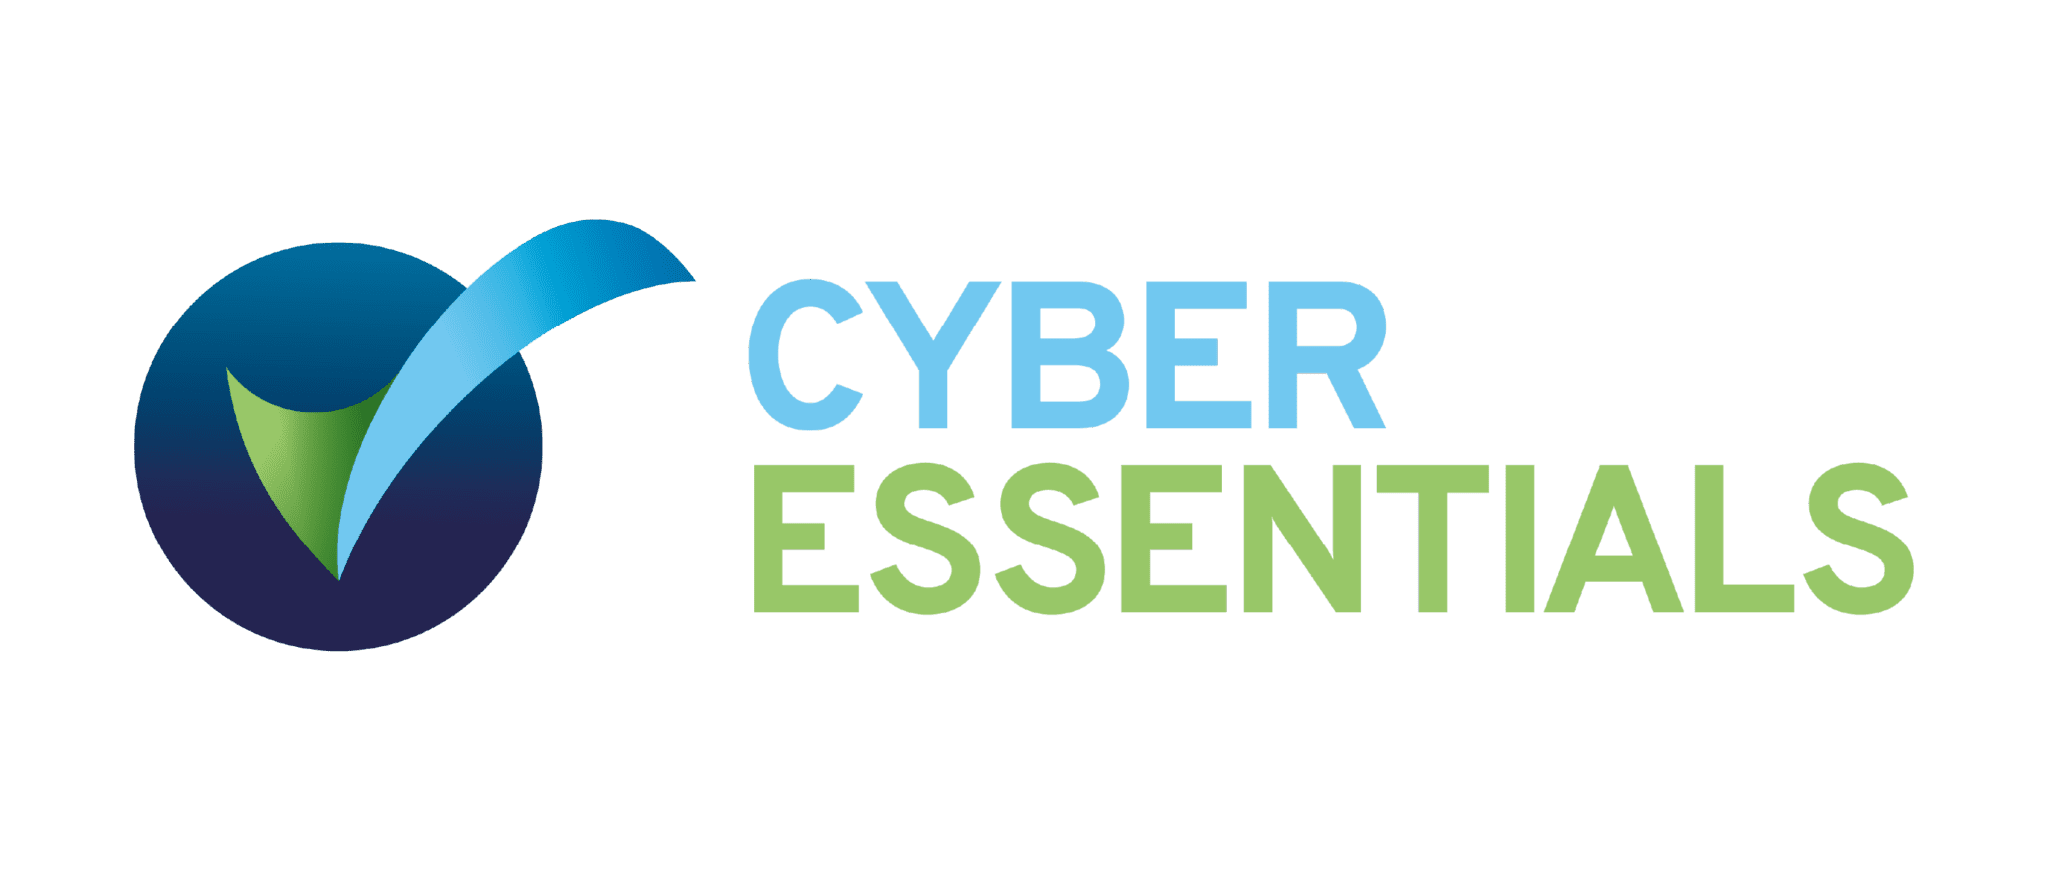 Cyber Essentials. Cyber Security